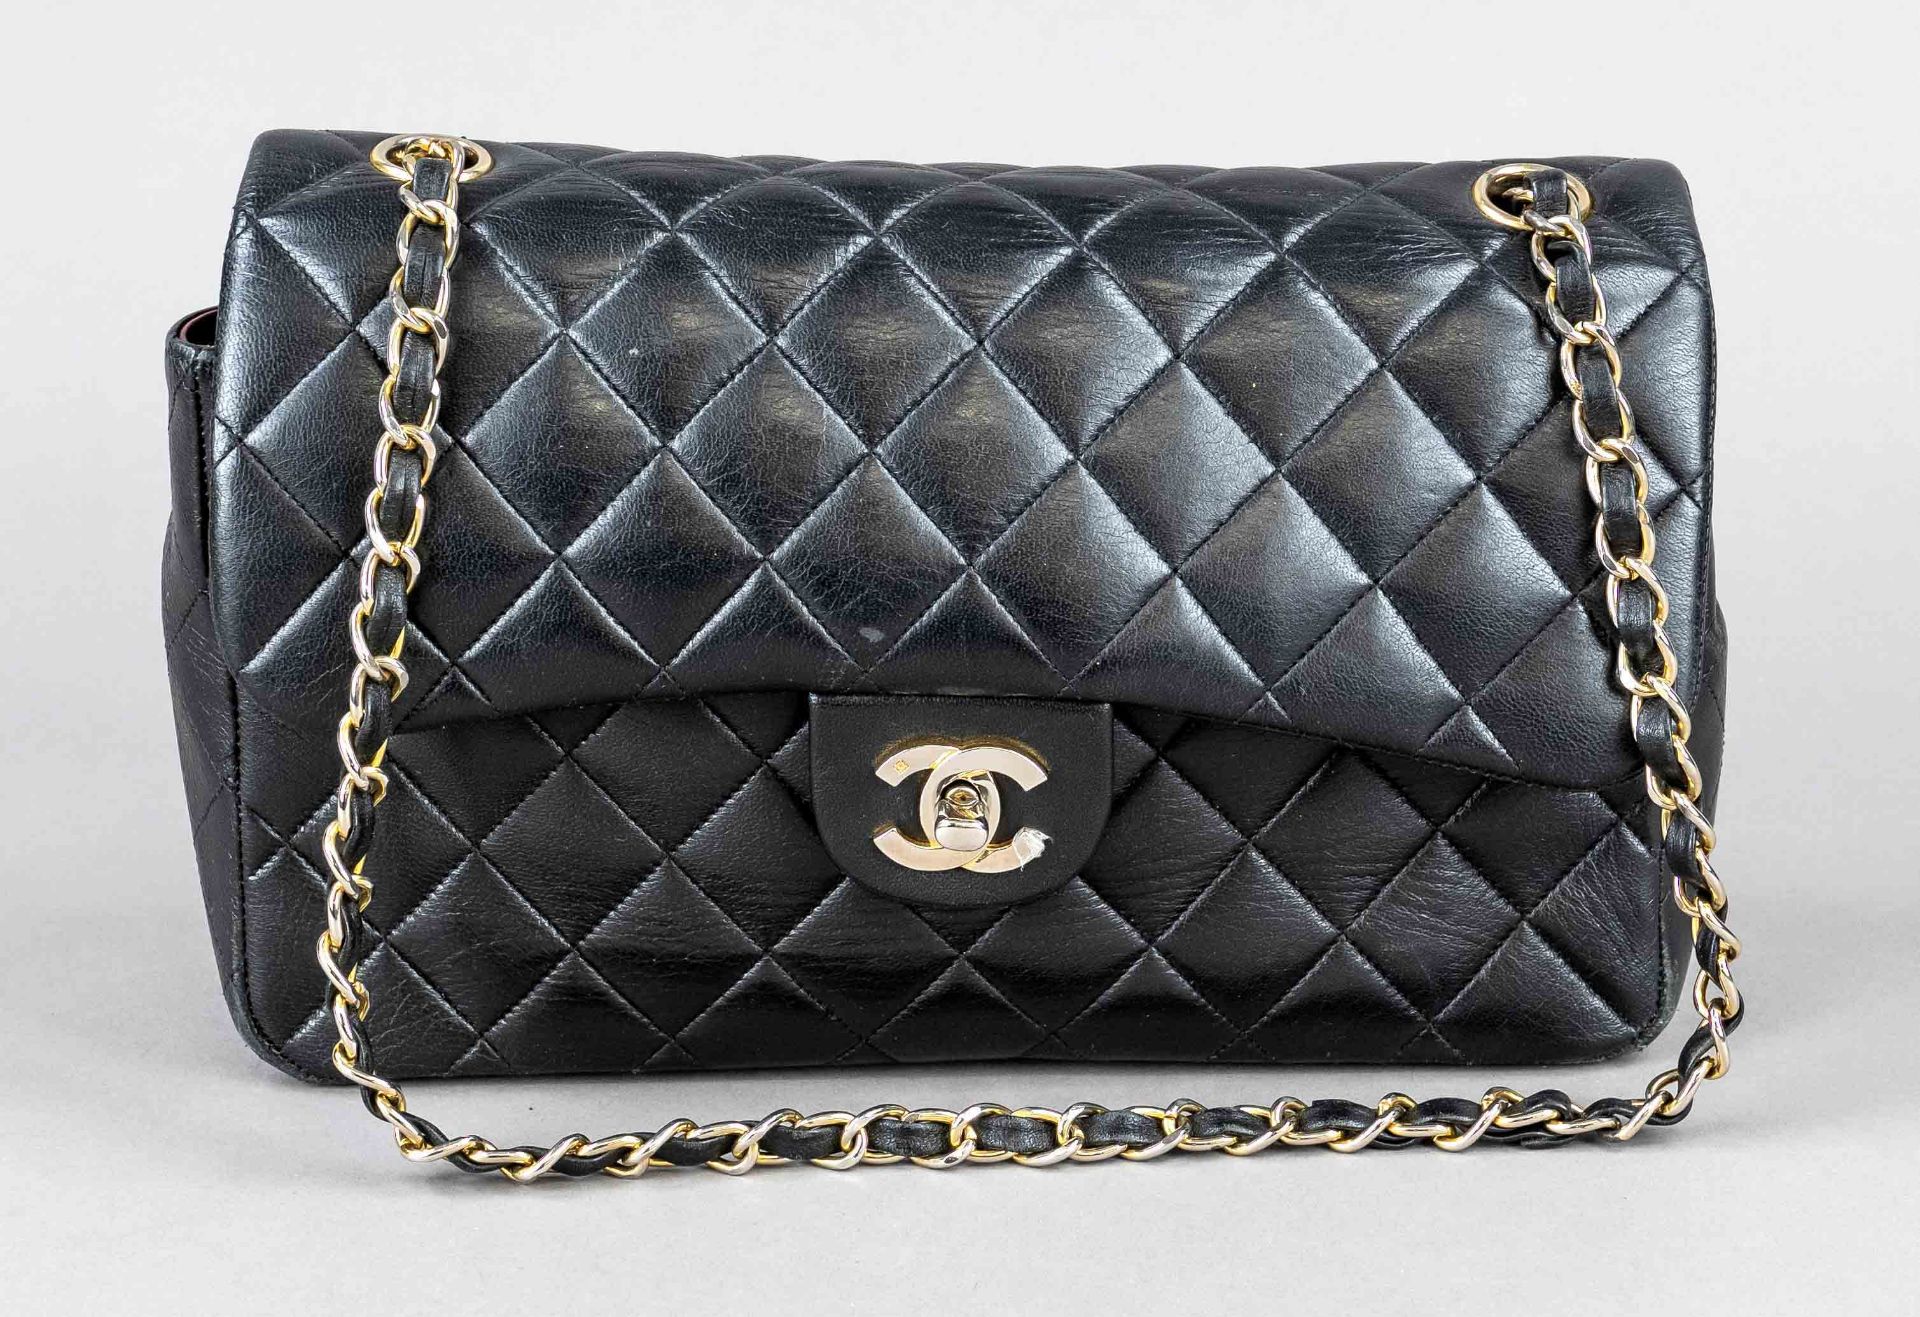 Chanel, Black Quilted Double Flap Bag, black quilted and padded leather in brand typical diamond